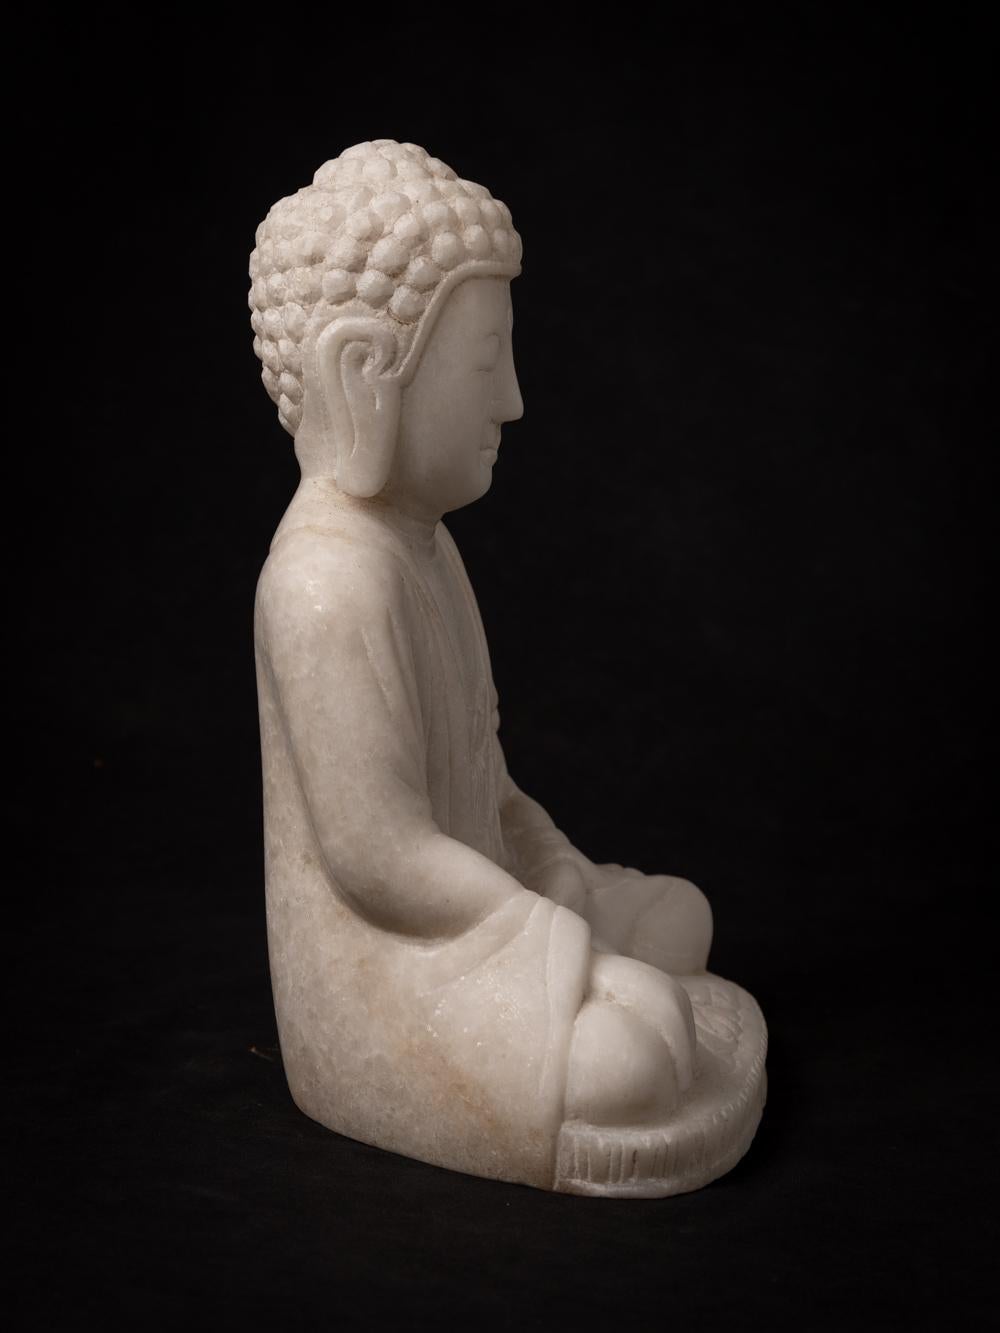 This elegant Marble Buddha statue, portraying the Bhumisparsha mudra, is a work of art that stands at 28.5 cm in height, with dimensions of 19 cm in width and 14.7 cm in depth. Carved by hand from a single block of white marble, it represents a